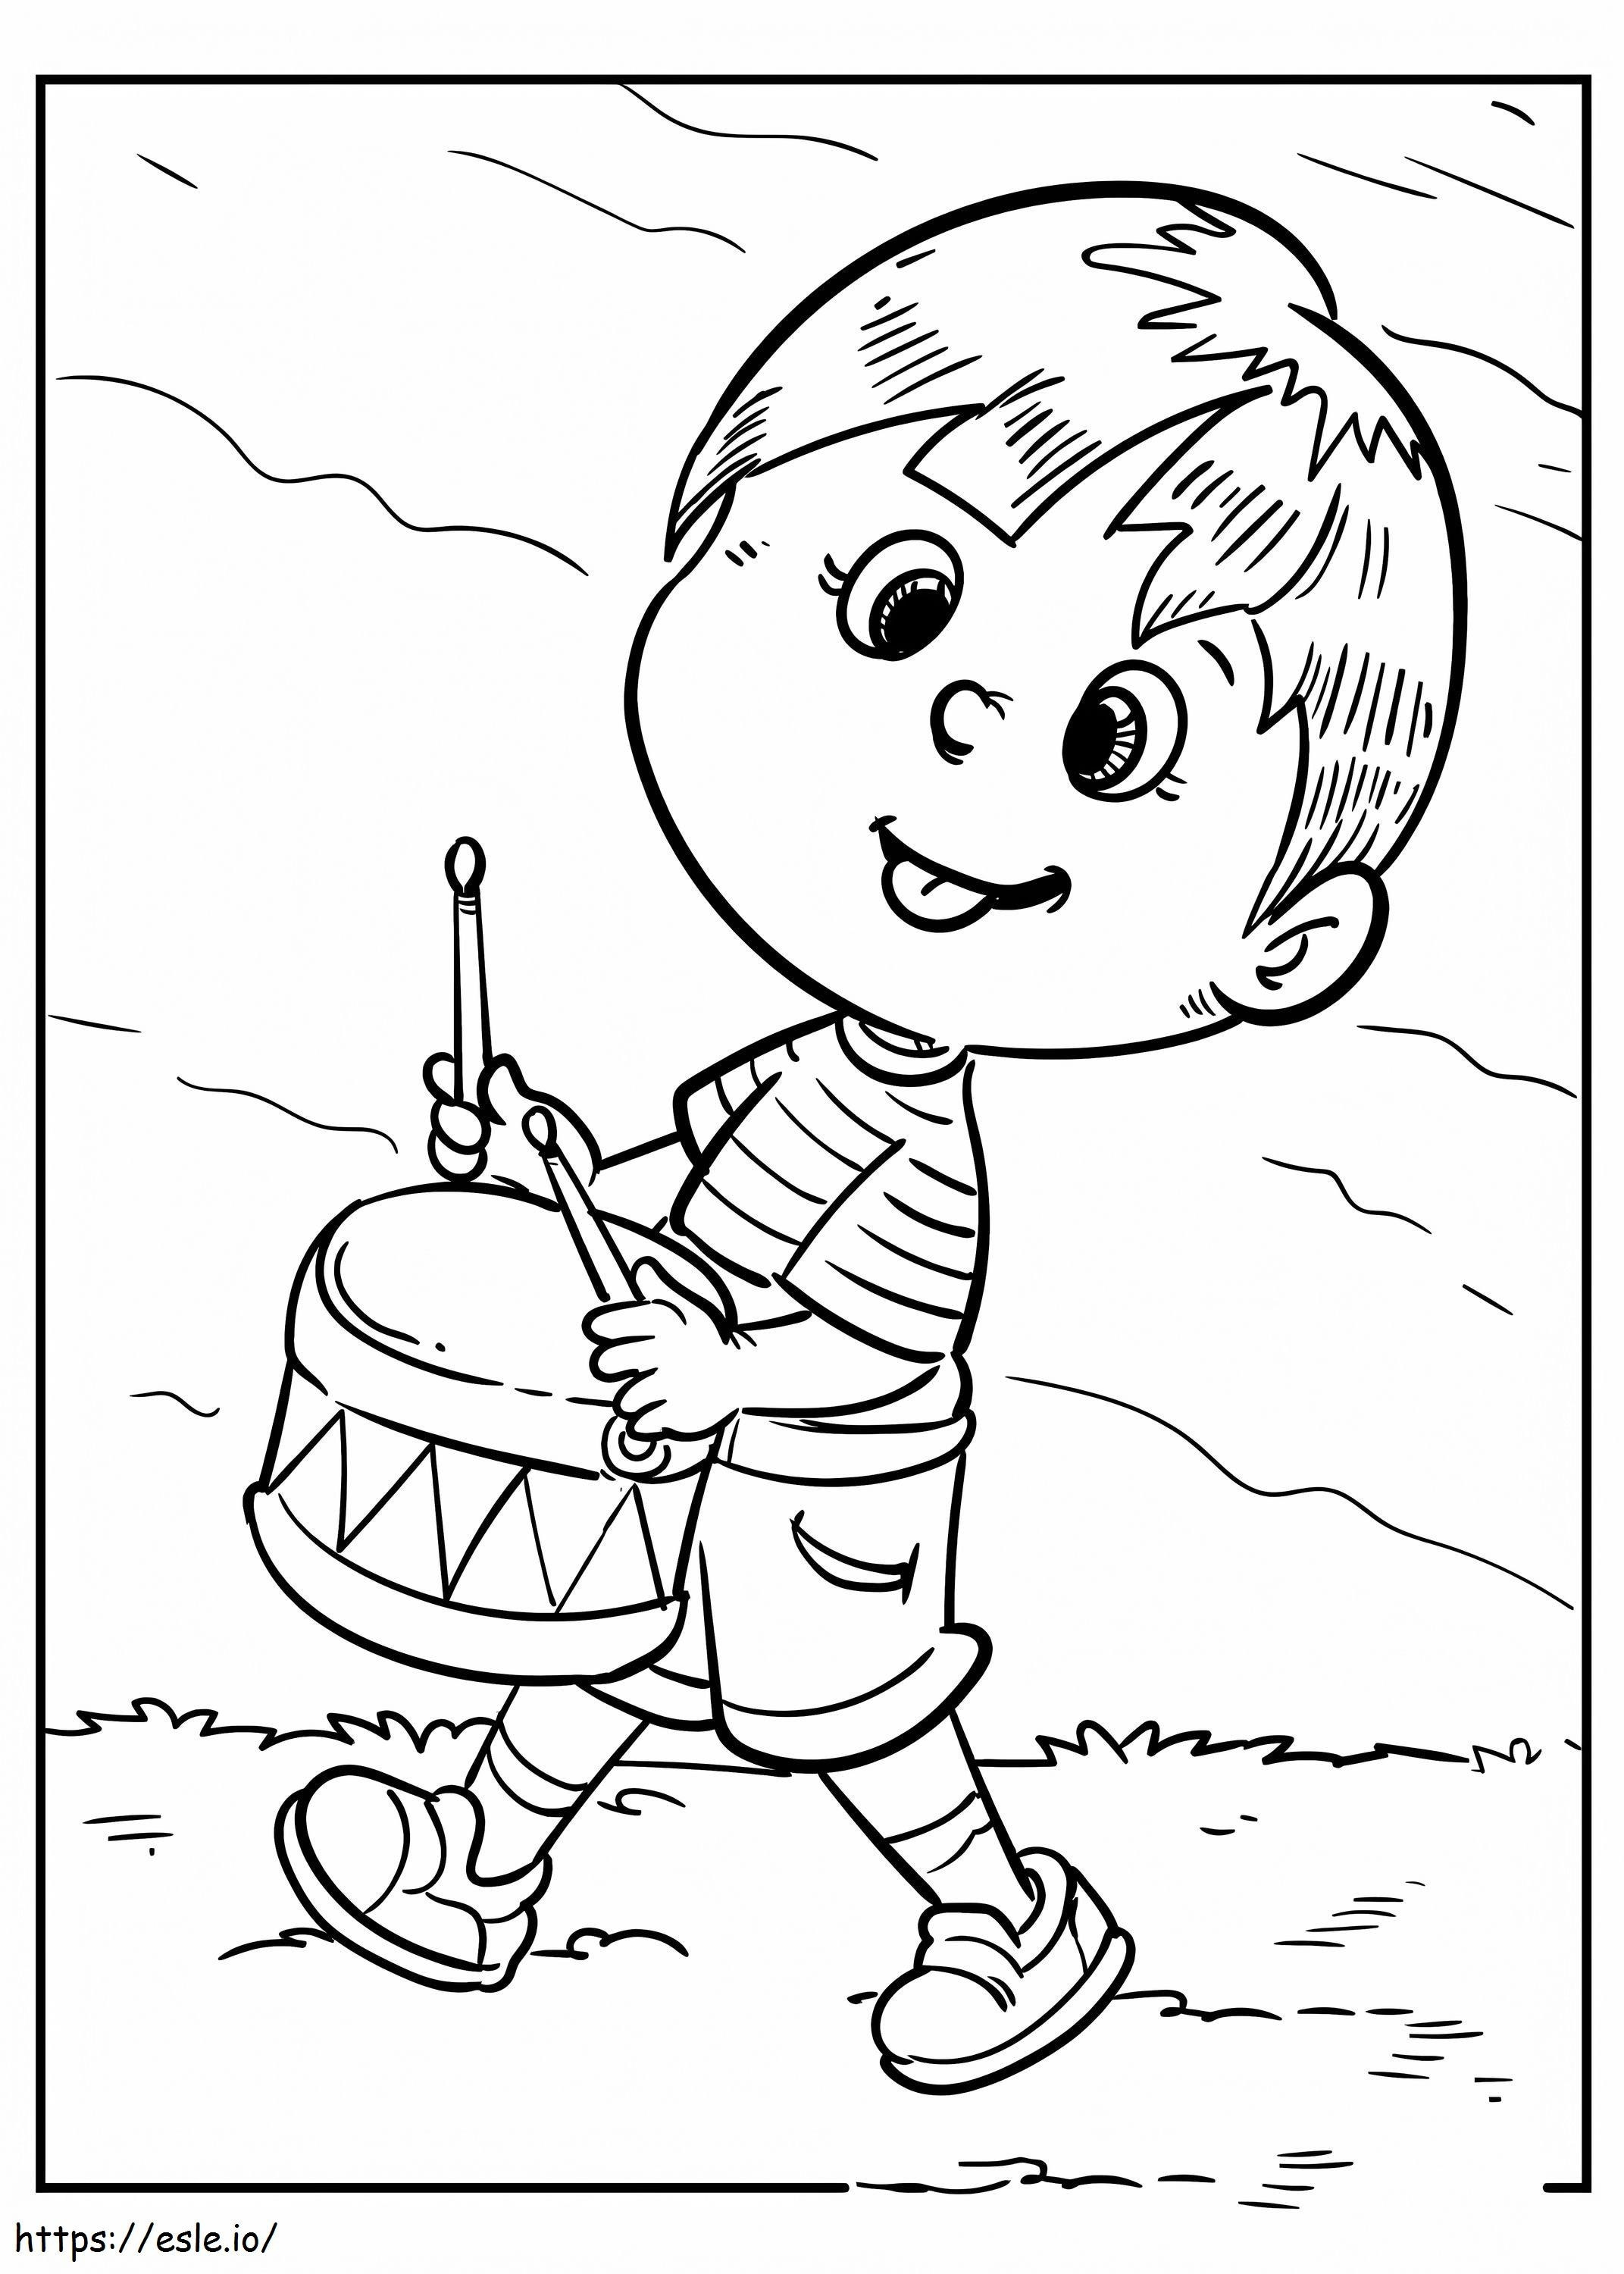 Boy Drumming coloring page